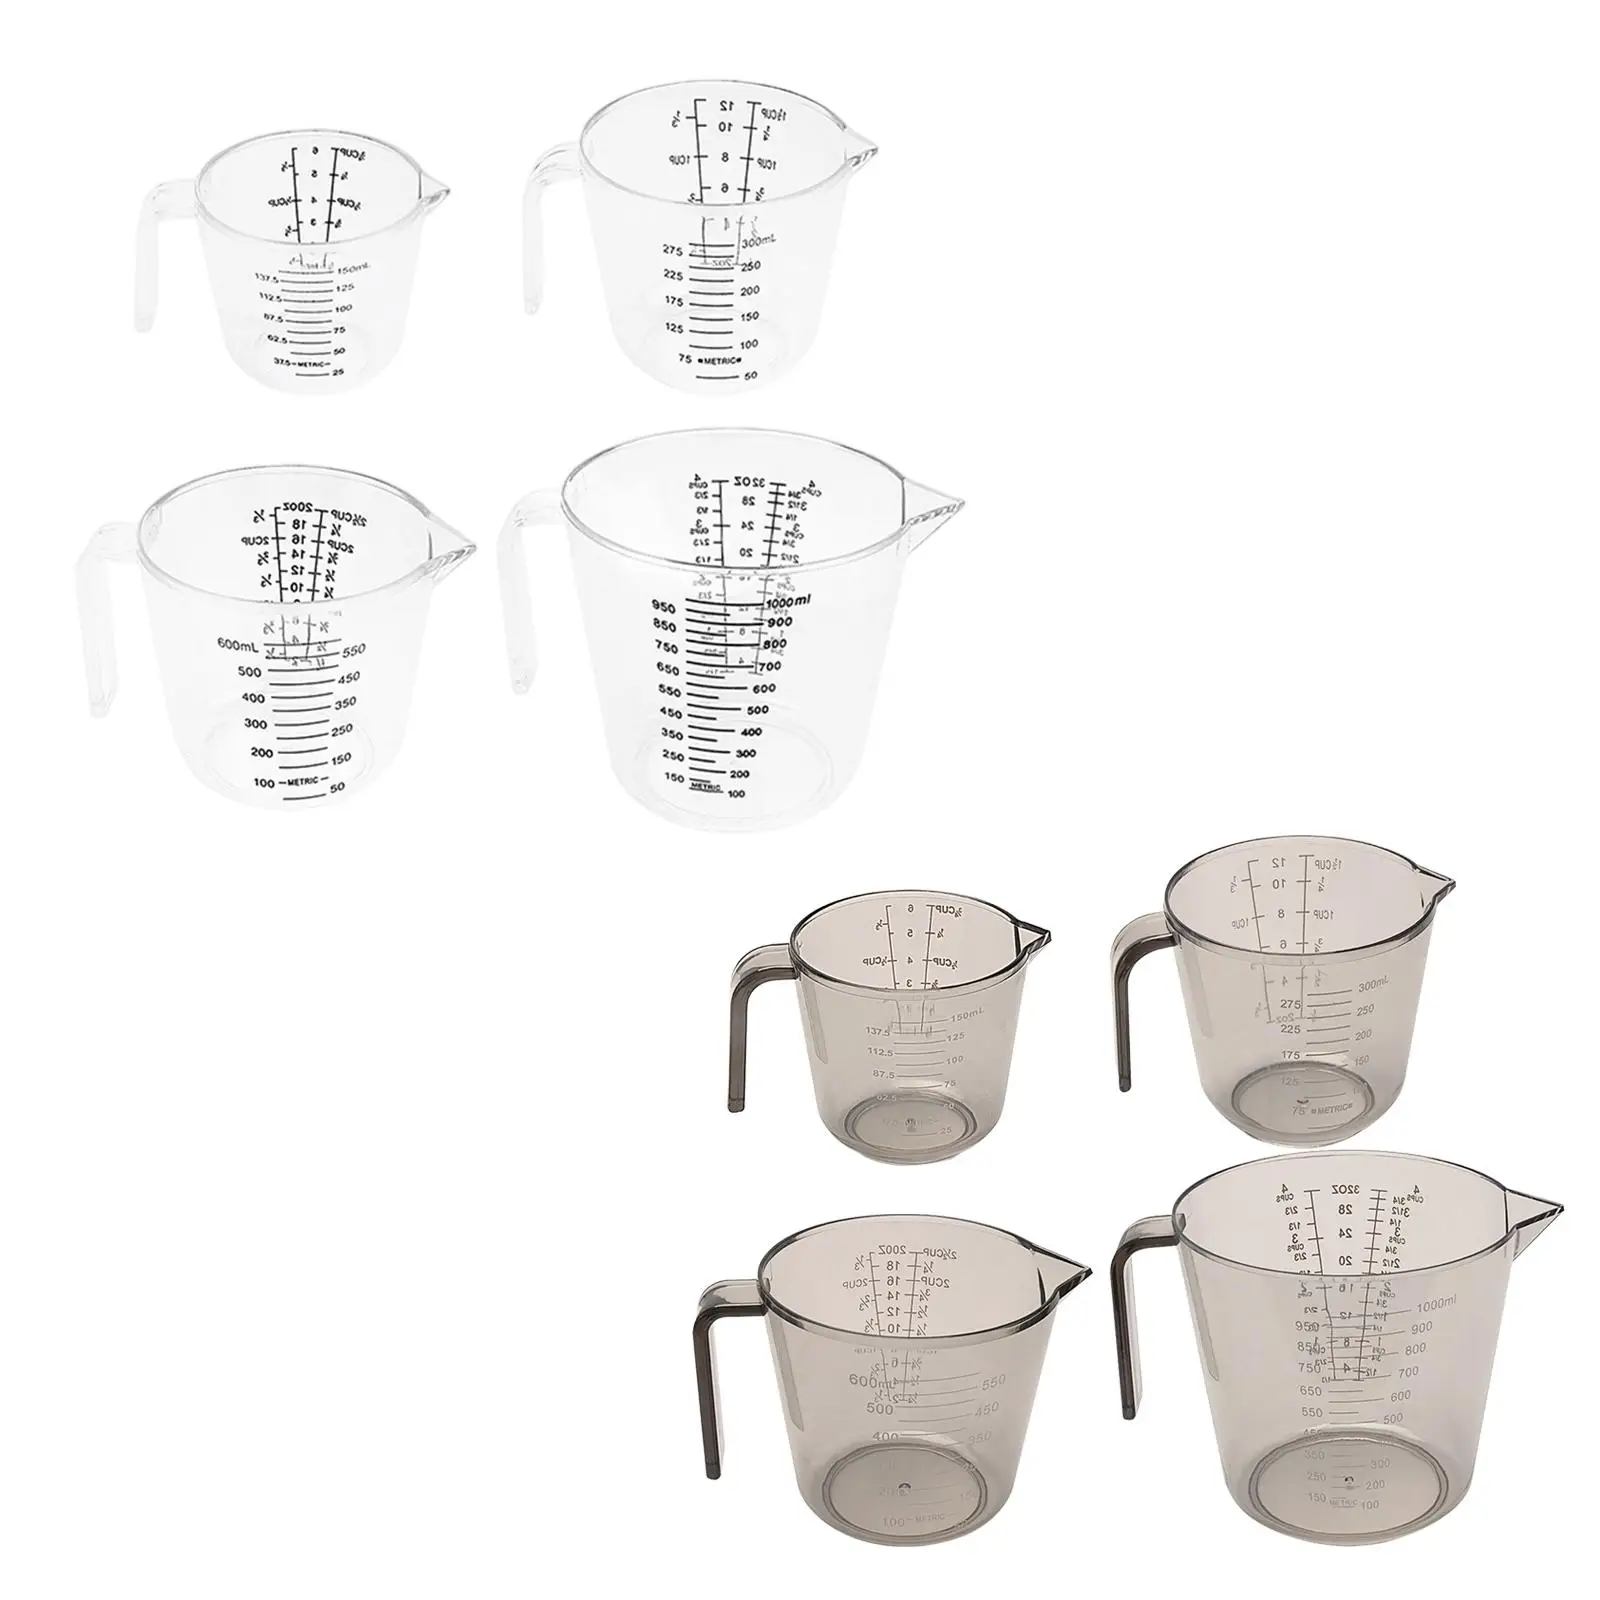 4x Measuring Cups Scales Portable Durable Mixing Mug for Baking Home Kitchen